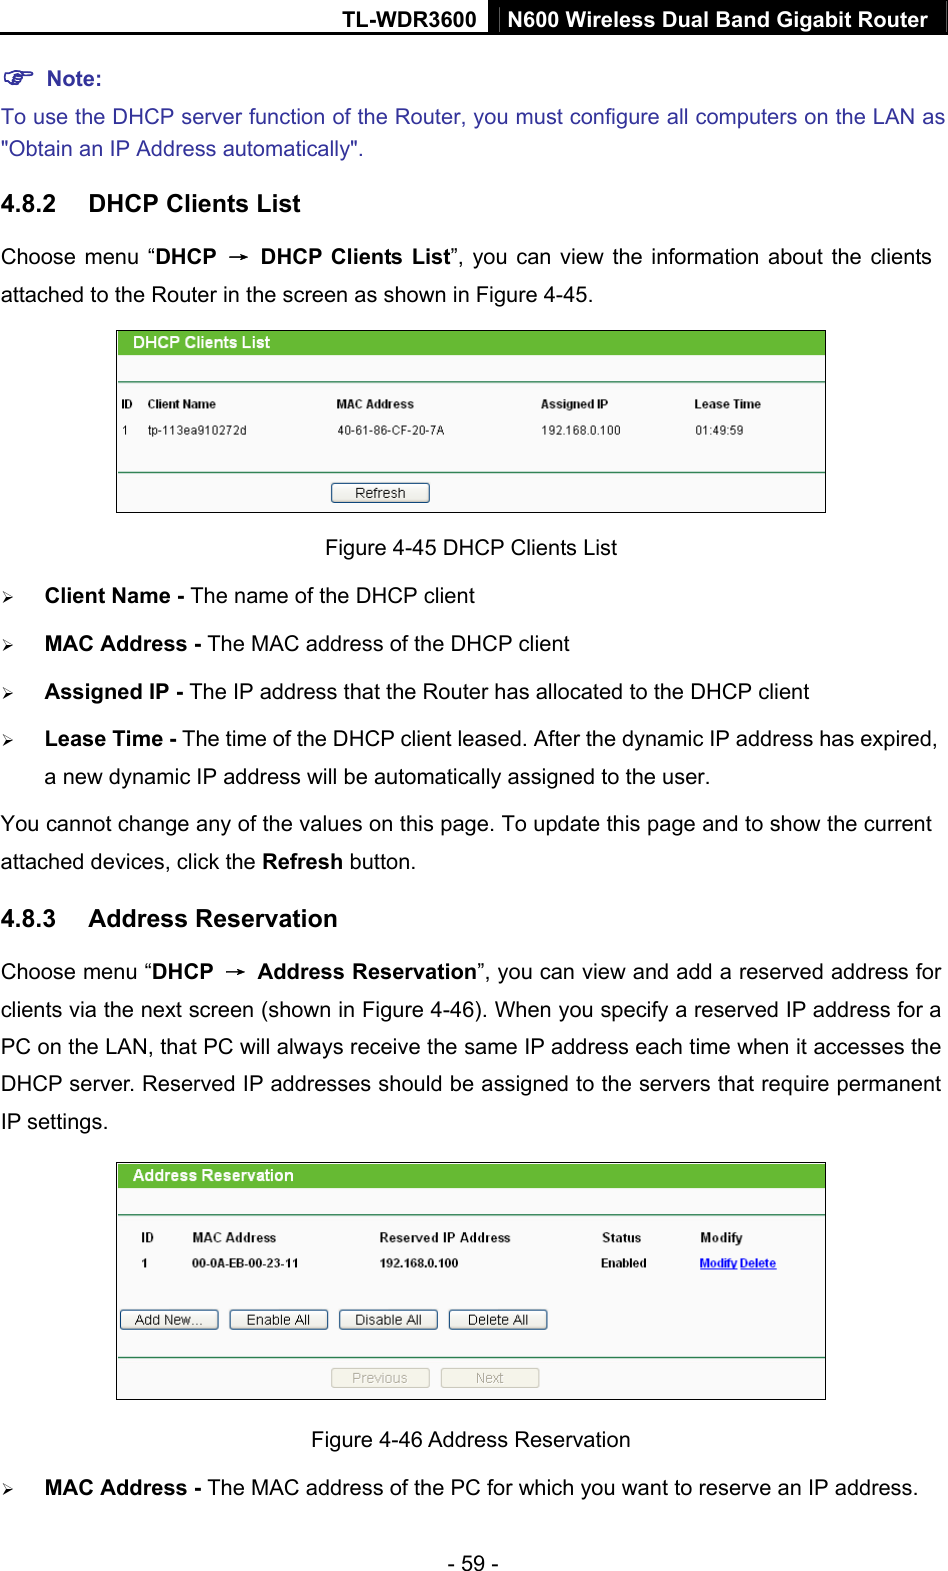 TL-WDR3600 N600 Wireless Dual Band Gigabit Router  - 59 - ) Note: To use the DHCP server function of the Router, you must configure all computers on the LAN as &quot;Obtain an IP Address automatically&quot;. 4.8.2  DHCP Clients List Choose menu “DHCP  →  DHCP Clients List”, you can view the information about the clients attached to the Router in the screen as shown in Figure 4-45.  Figure 4-45 DHCP Clients List ¾ Client Name - The name of the DHCP client   ¾ MAC Address - The MAC address of the DHCP client   ¾ Assigned IP - The IP address that the Router has allocated to the DHCP client ¾ Lease Time - The time of the DHCP client leased. After the dynamic IP address has expired, a new dynamic IP address will be automatically assigned to the user.     You cannot change any of the values on this page. To update this page and to show the current attached devices, click the Refresh button. 4.8.3  Address Reservation Choose menu “DHCP  → Address Reservation”, you can view and add a reserved address for clients via the next screen (shown in Figure 4-46). When you specify a reserved IP address for a PC on the LAN, that PC will always receive the same IP address each time when it accesses the DHCP server. Reserved IP addresses should be assigned to the servers that require permanent IP settings.    Figure 4-46 Address Reservation ¾ MAC Address - The MAC address of the PC for which you want to reserve an IP address. 